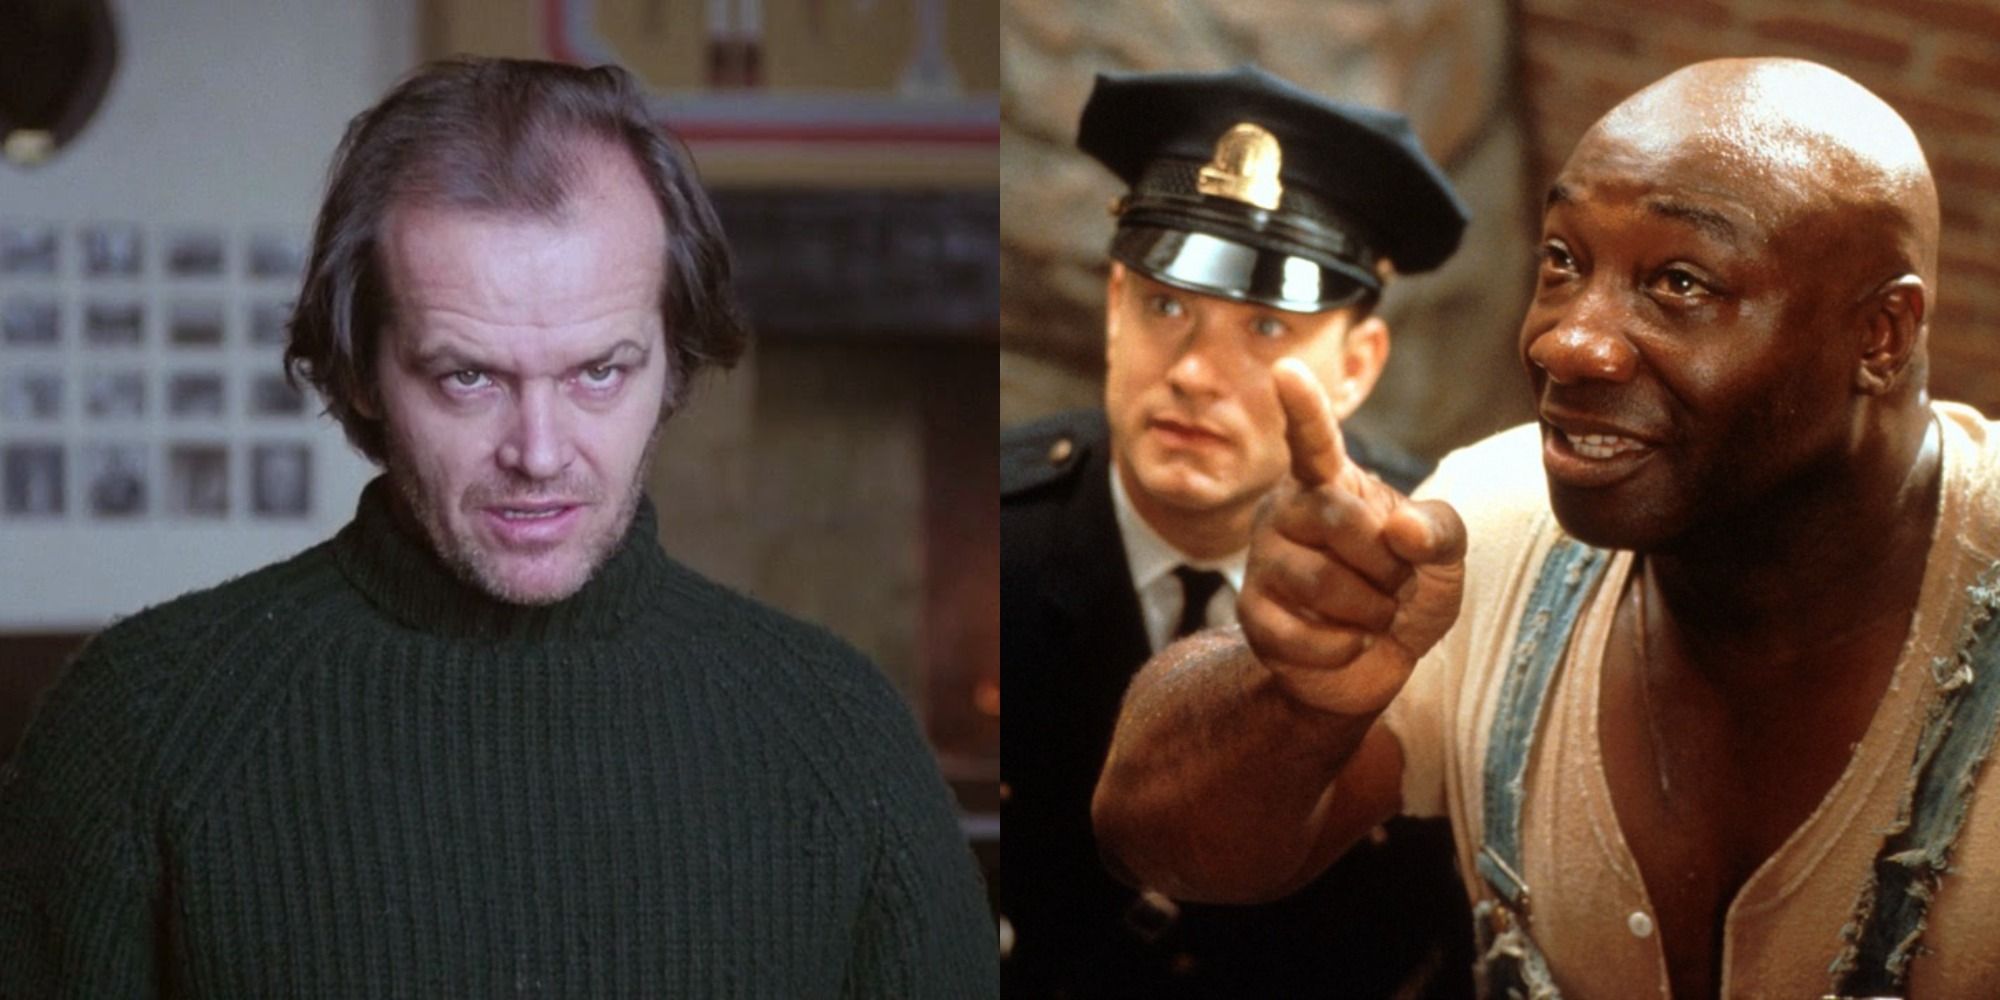 Split image showing Jack in The Shining and Paul and John in The Green Mile